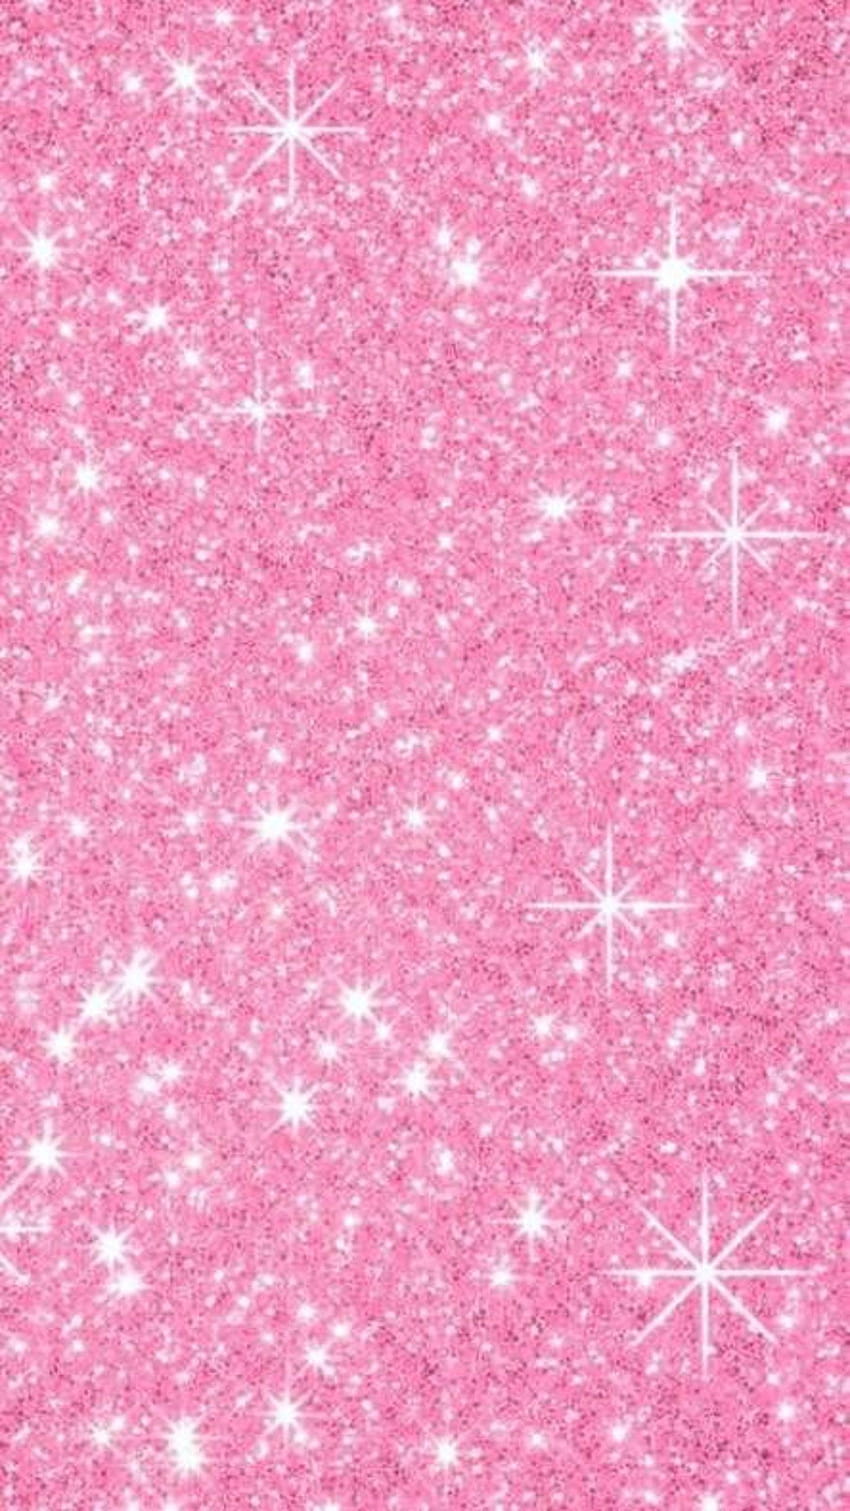 Pink Glitter for Android, pink sparkly HD phone wallpaper